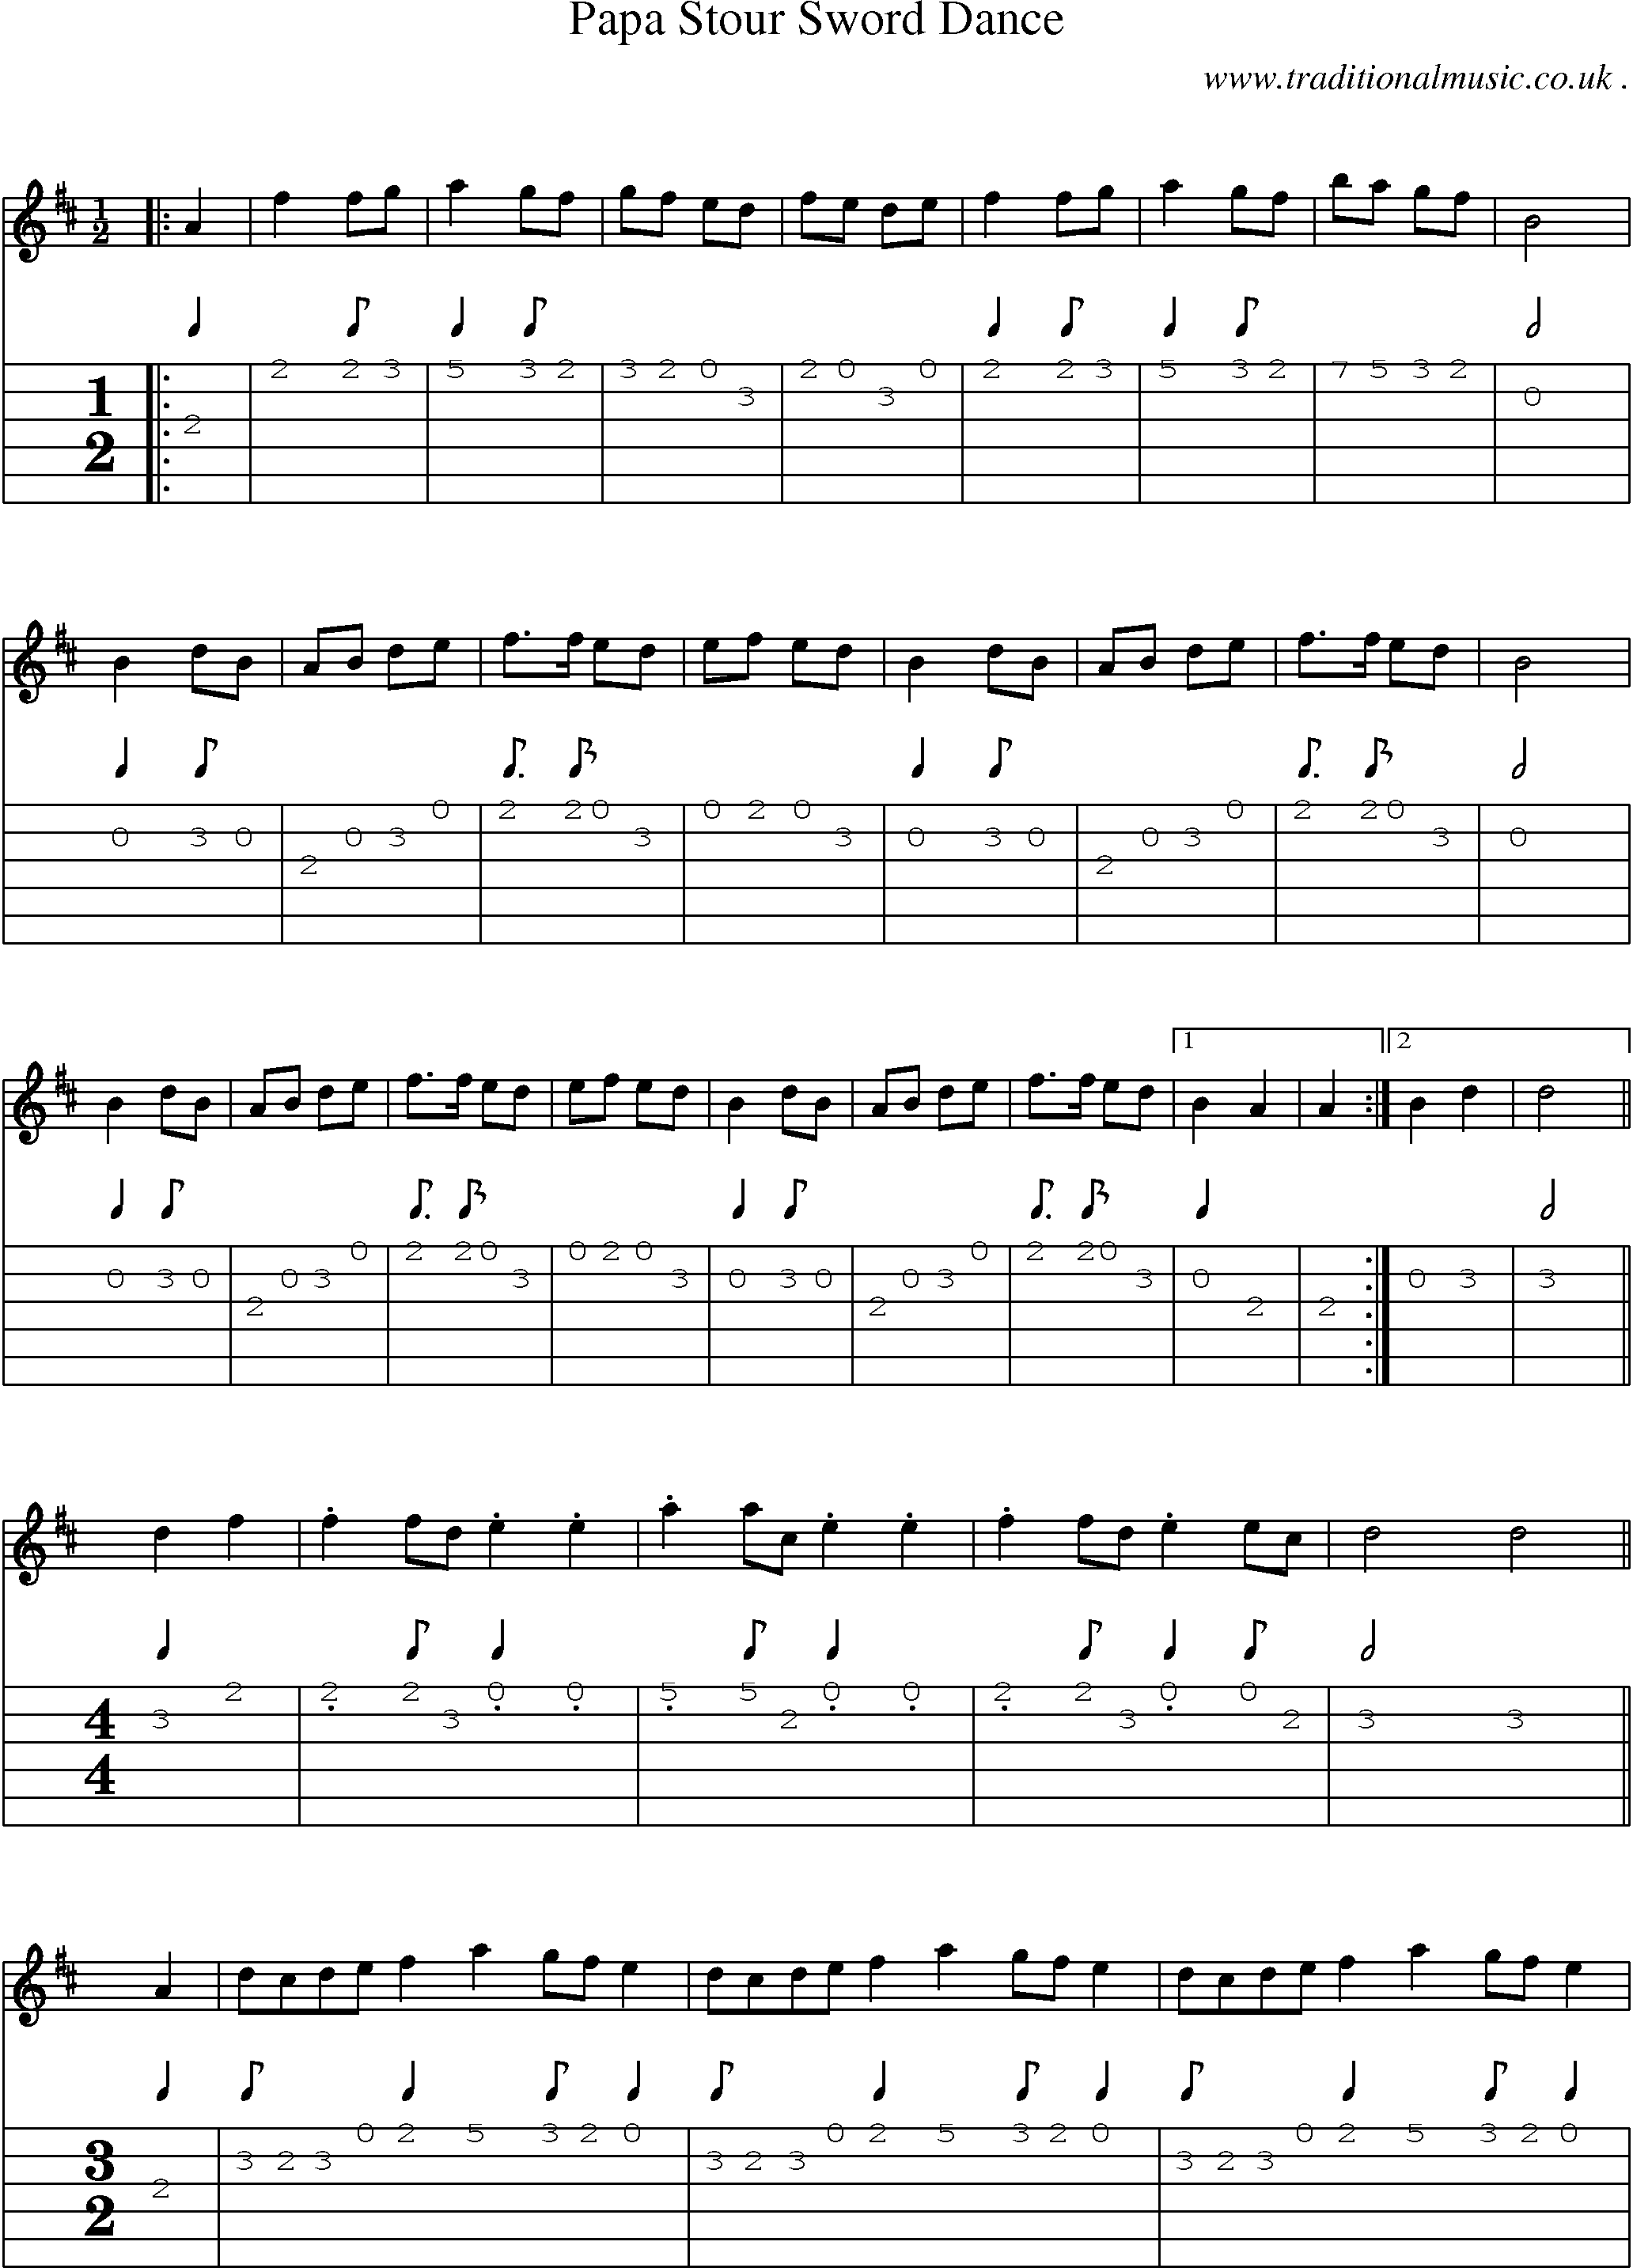 Sheet-Music and Guitar Tabs for Papa Stour Sword Dance